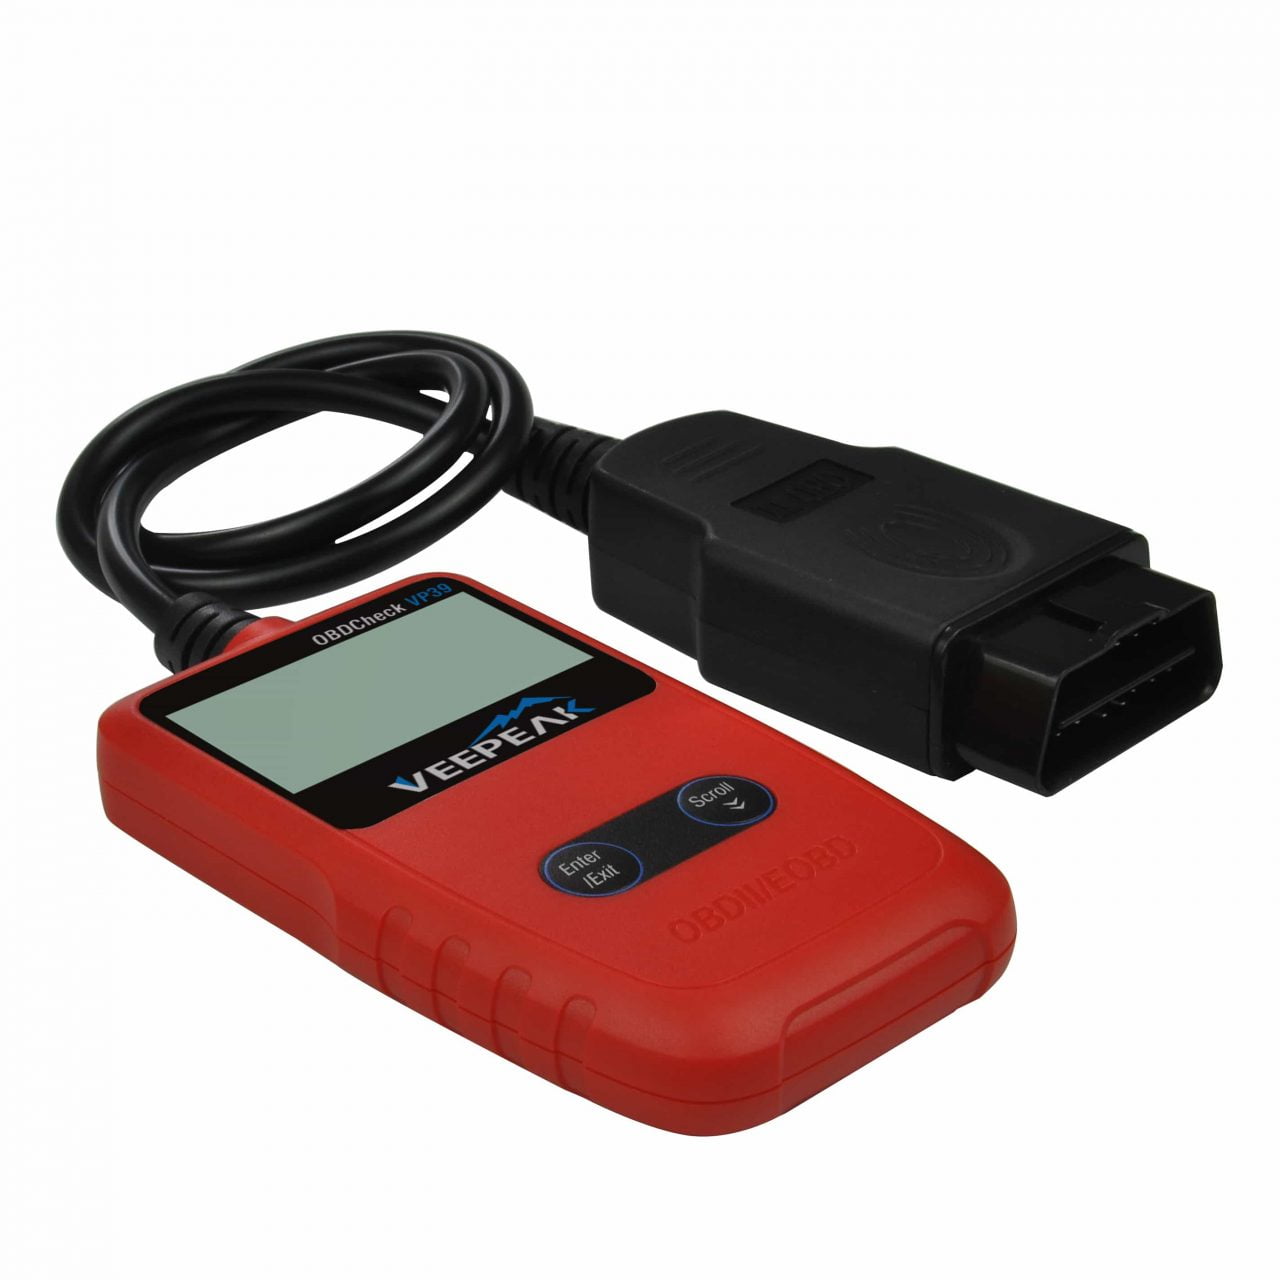 Users who want to check and clear basic trouble codes and are beginners at diagnosing their cars should buy VEEPEAK VP39 scanner.